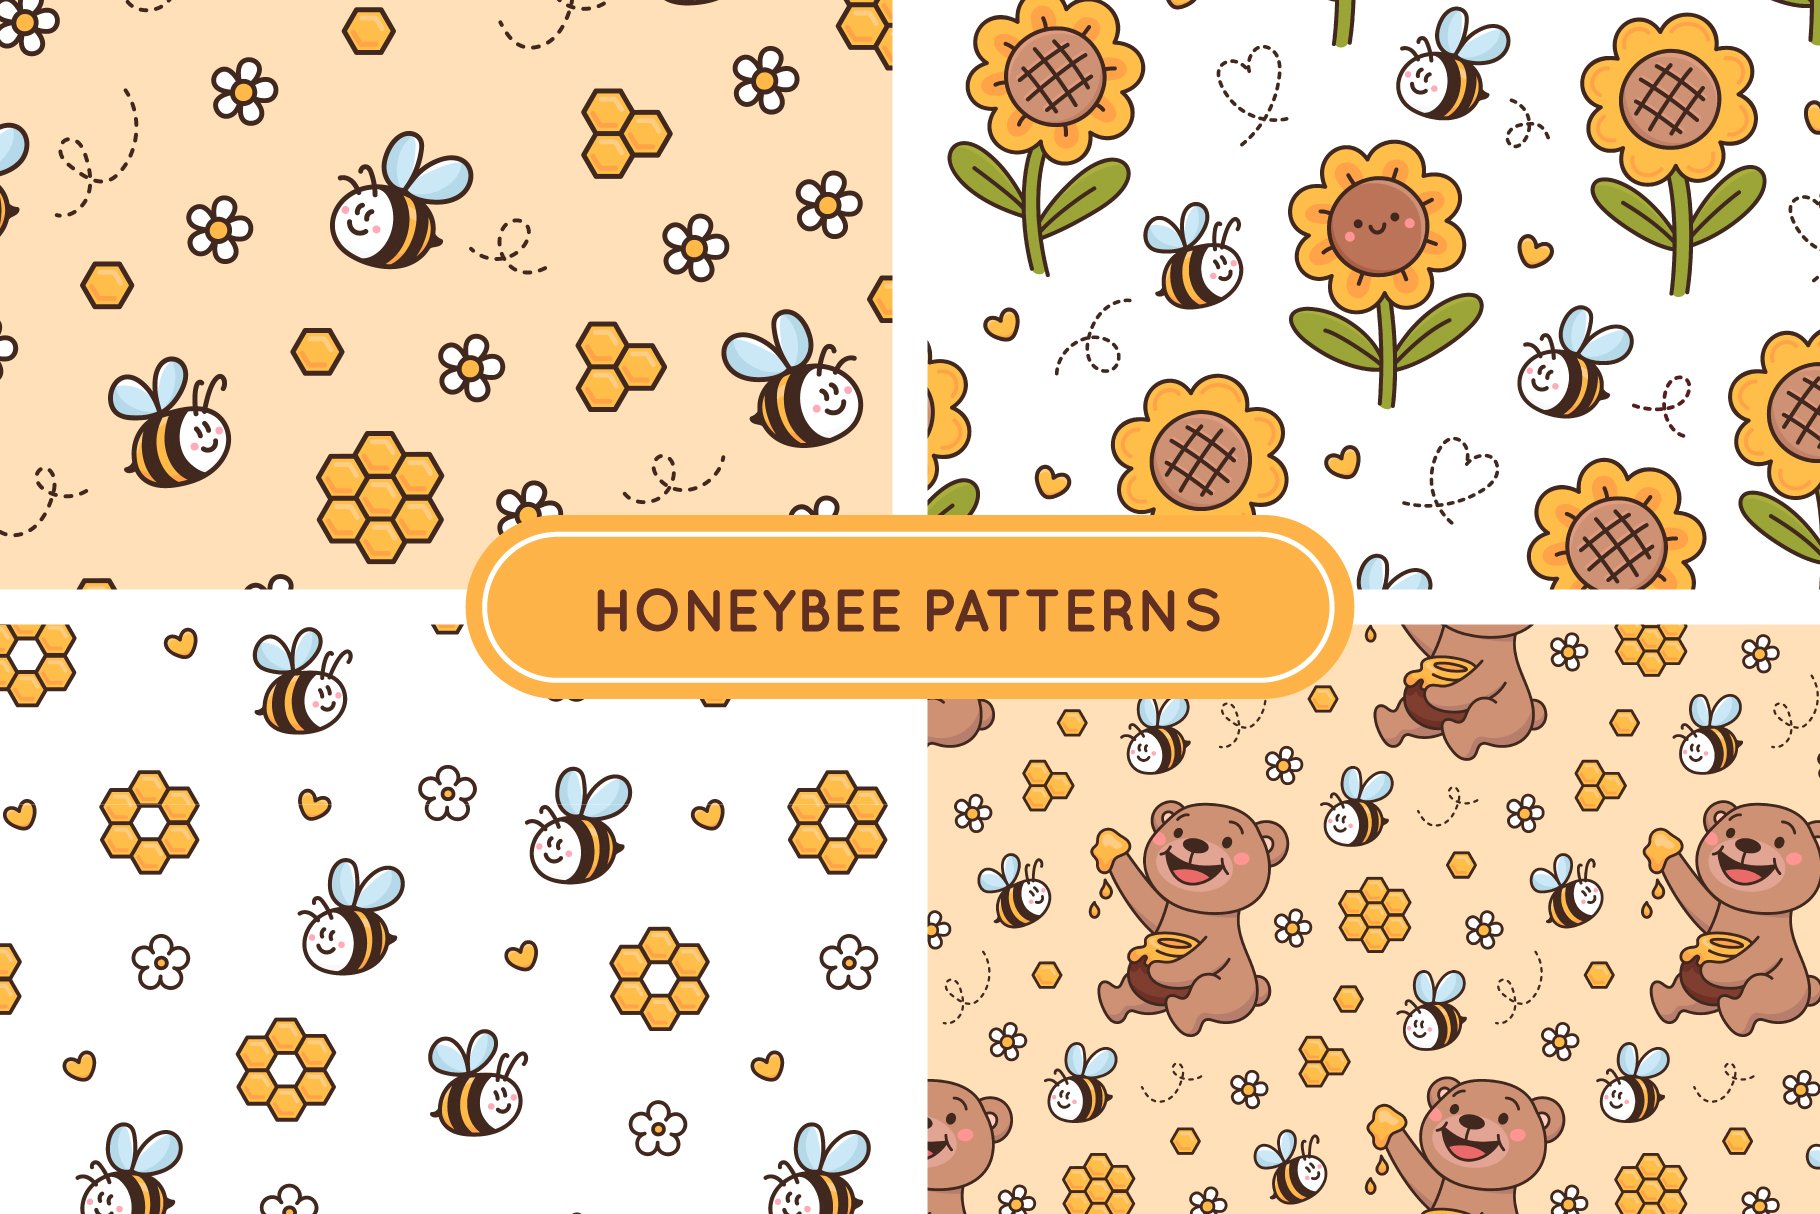 Honey bee patterns cover image.